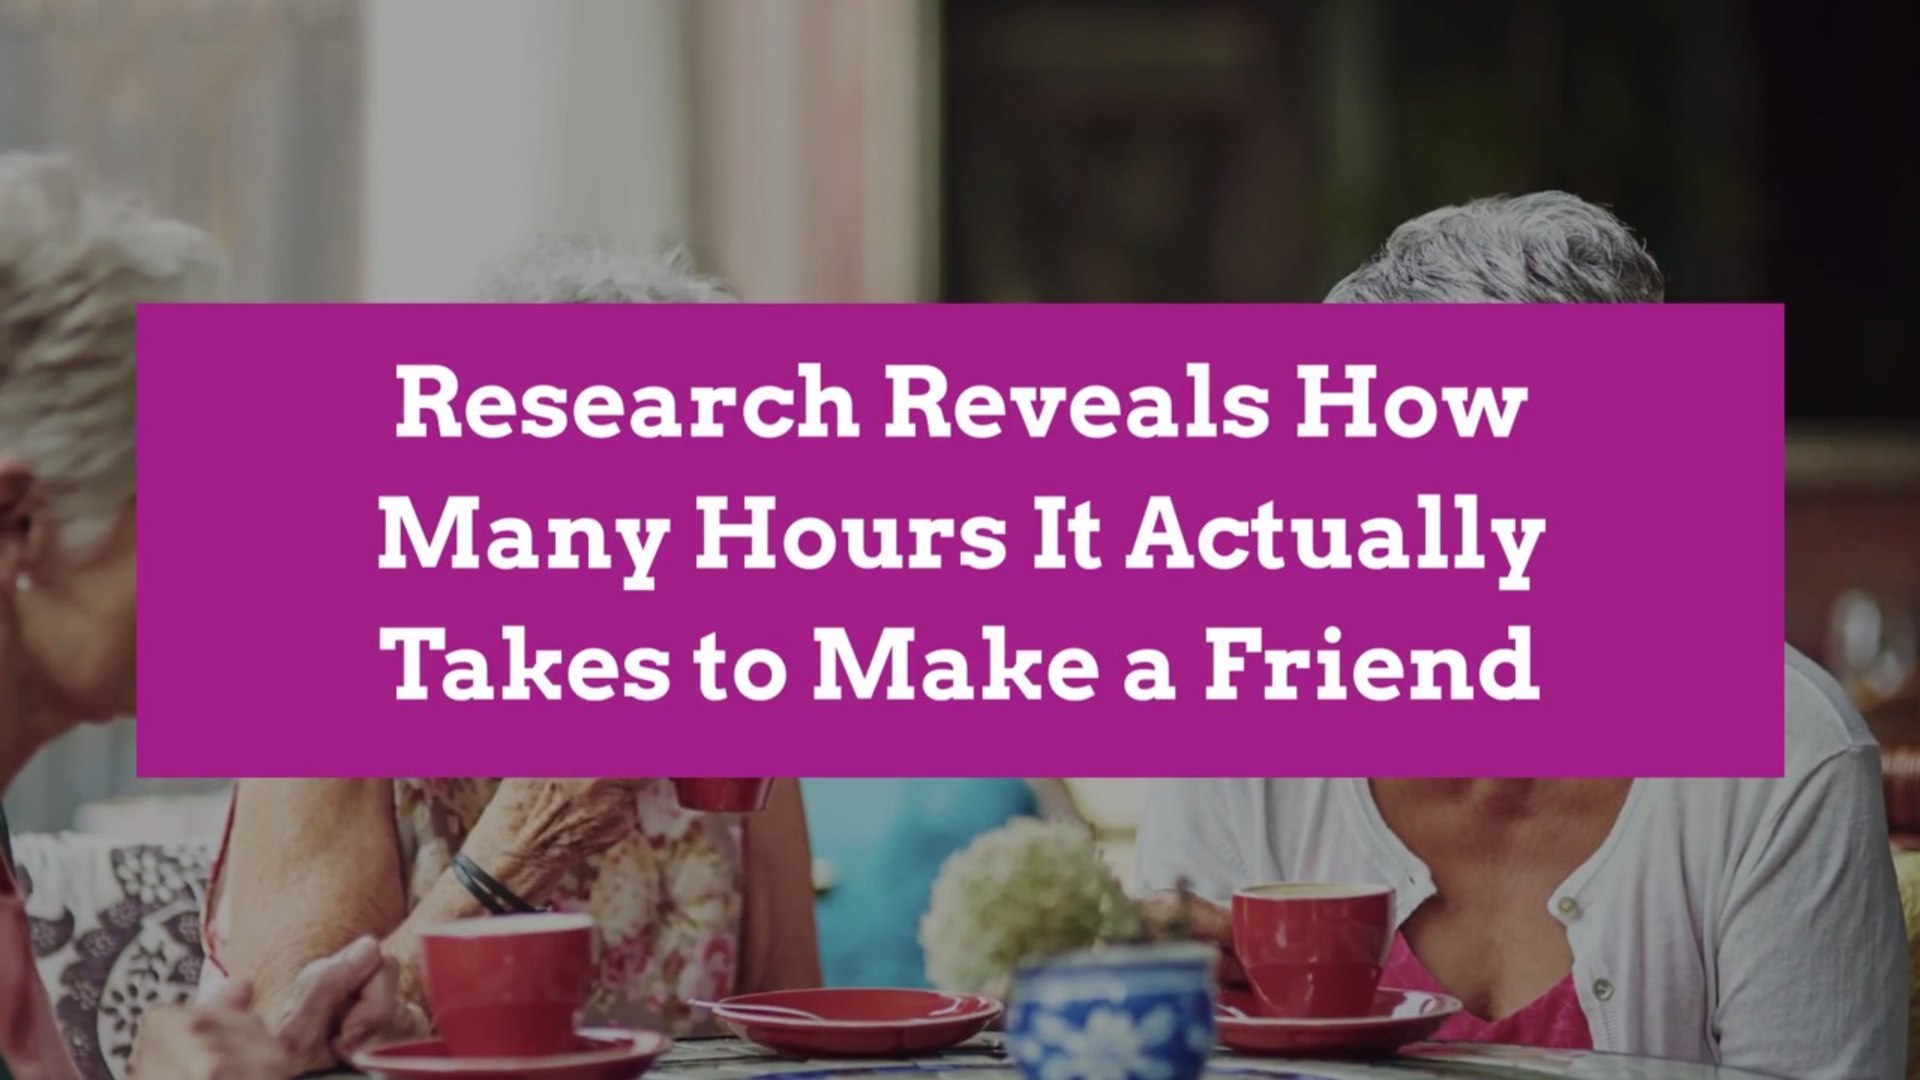 How to make friends? Study reveals time it takes